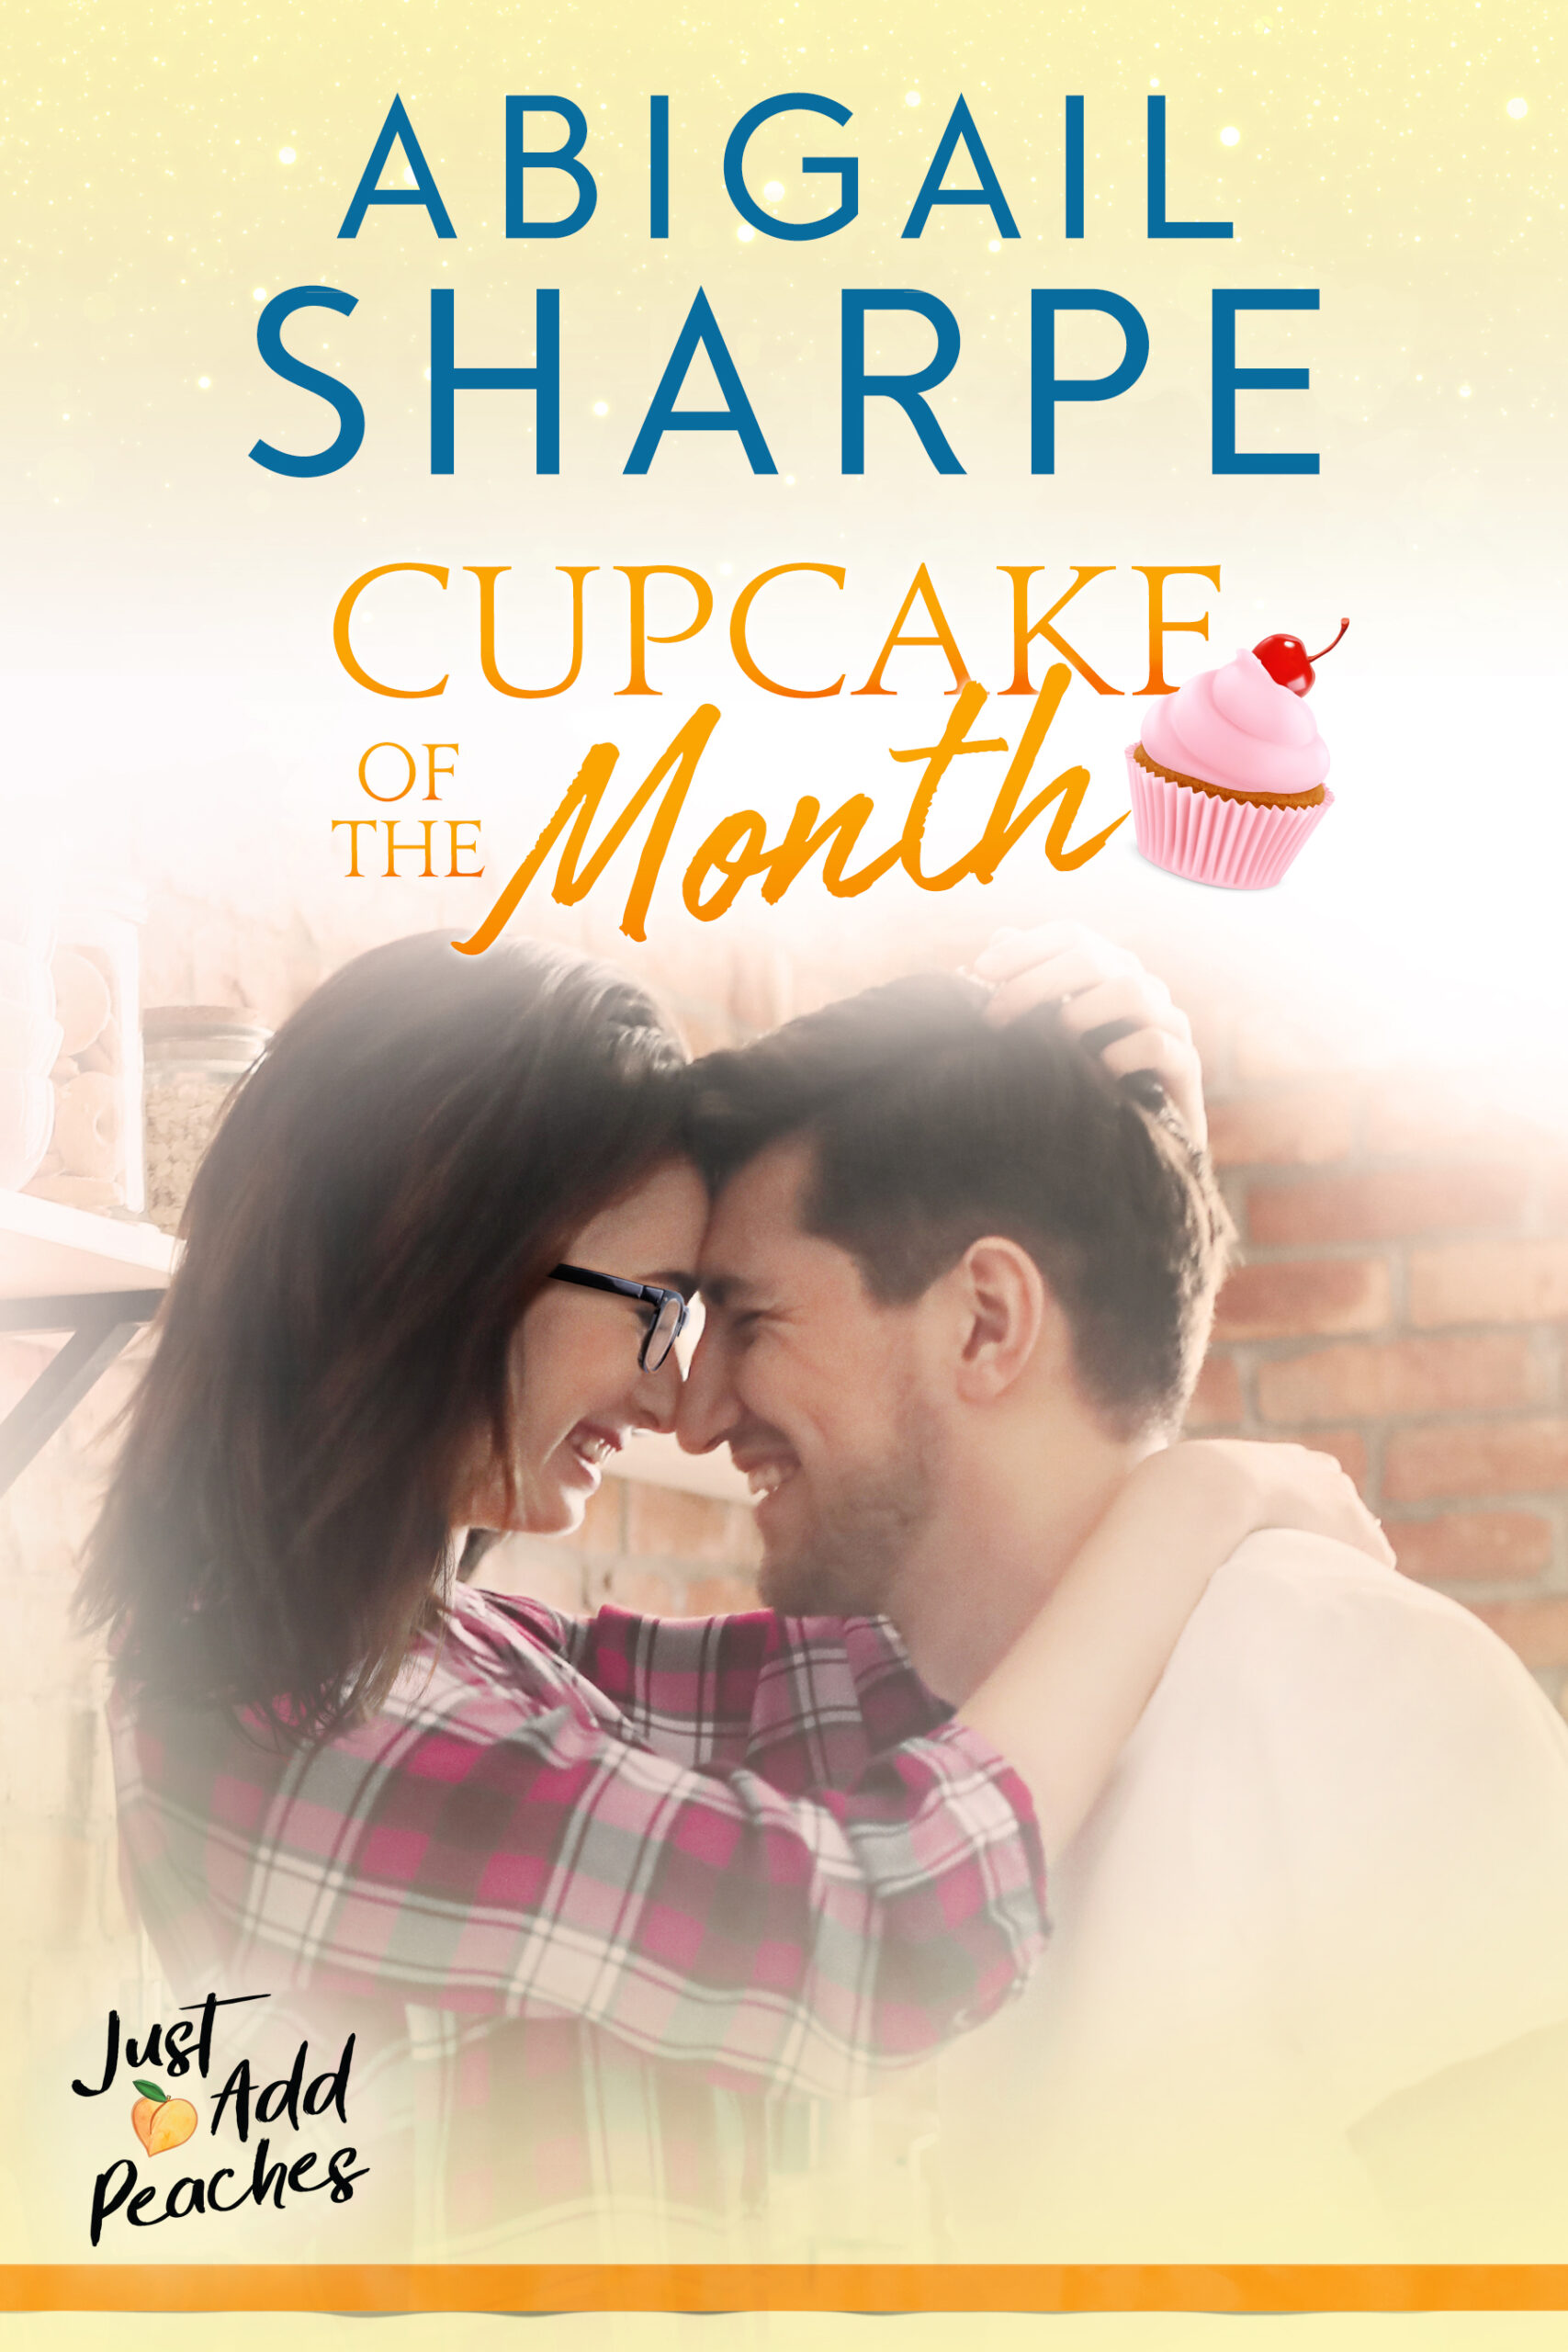 Cupcake of the Month